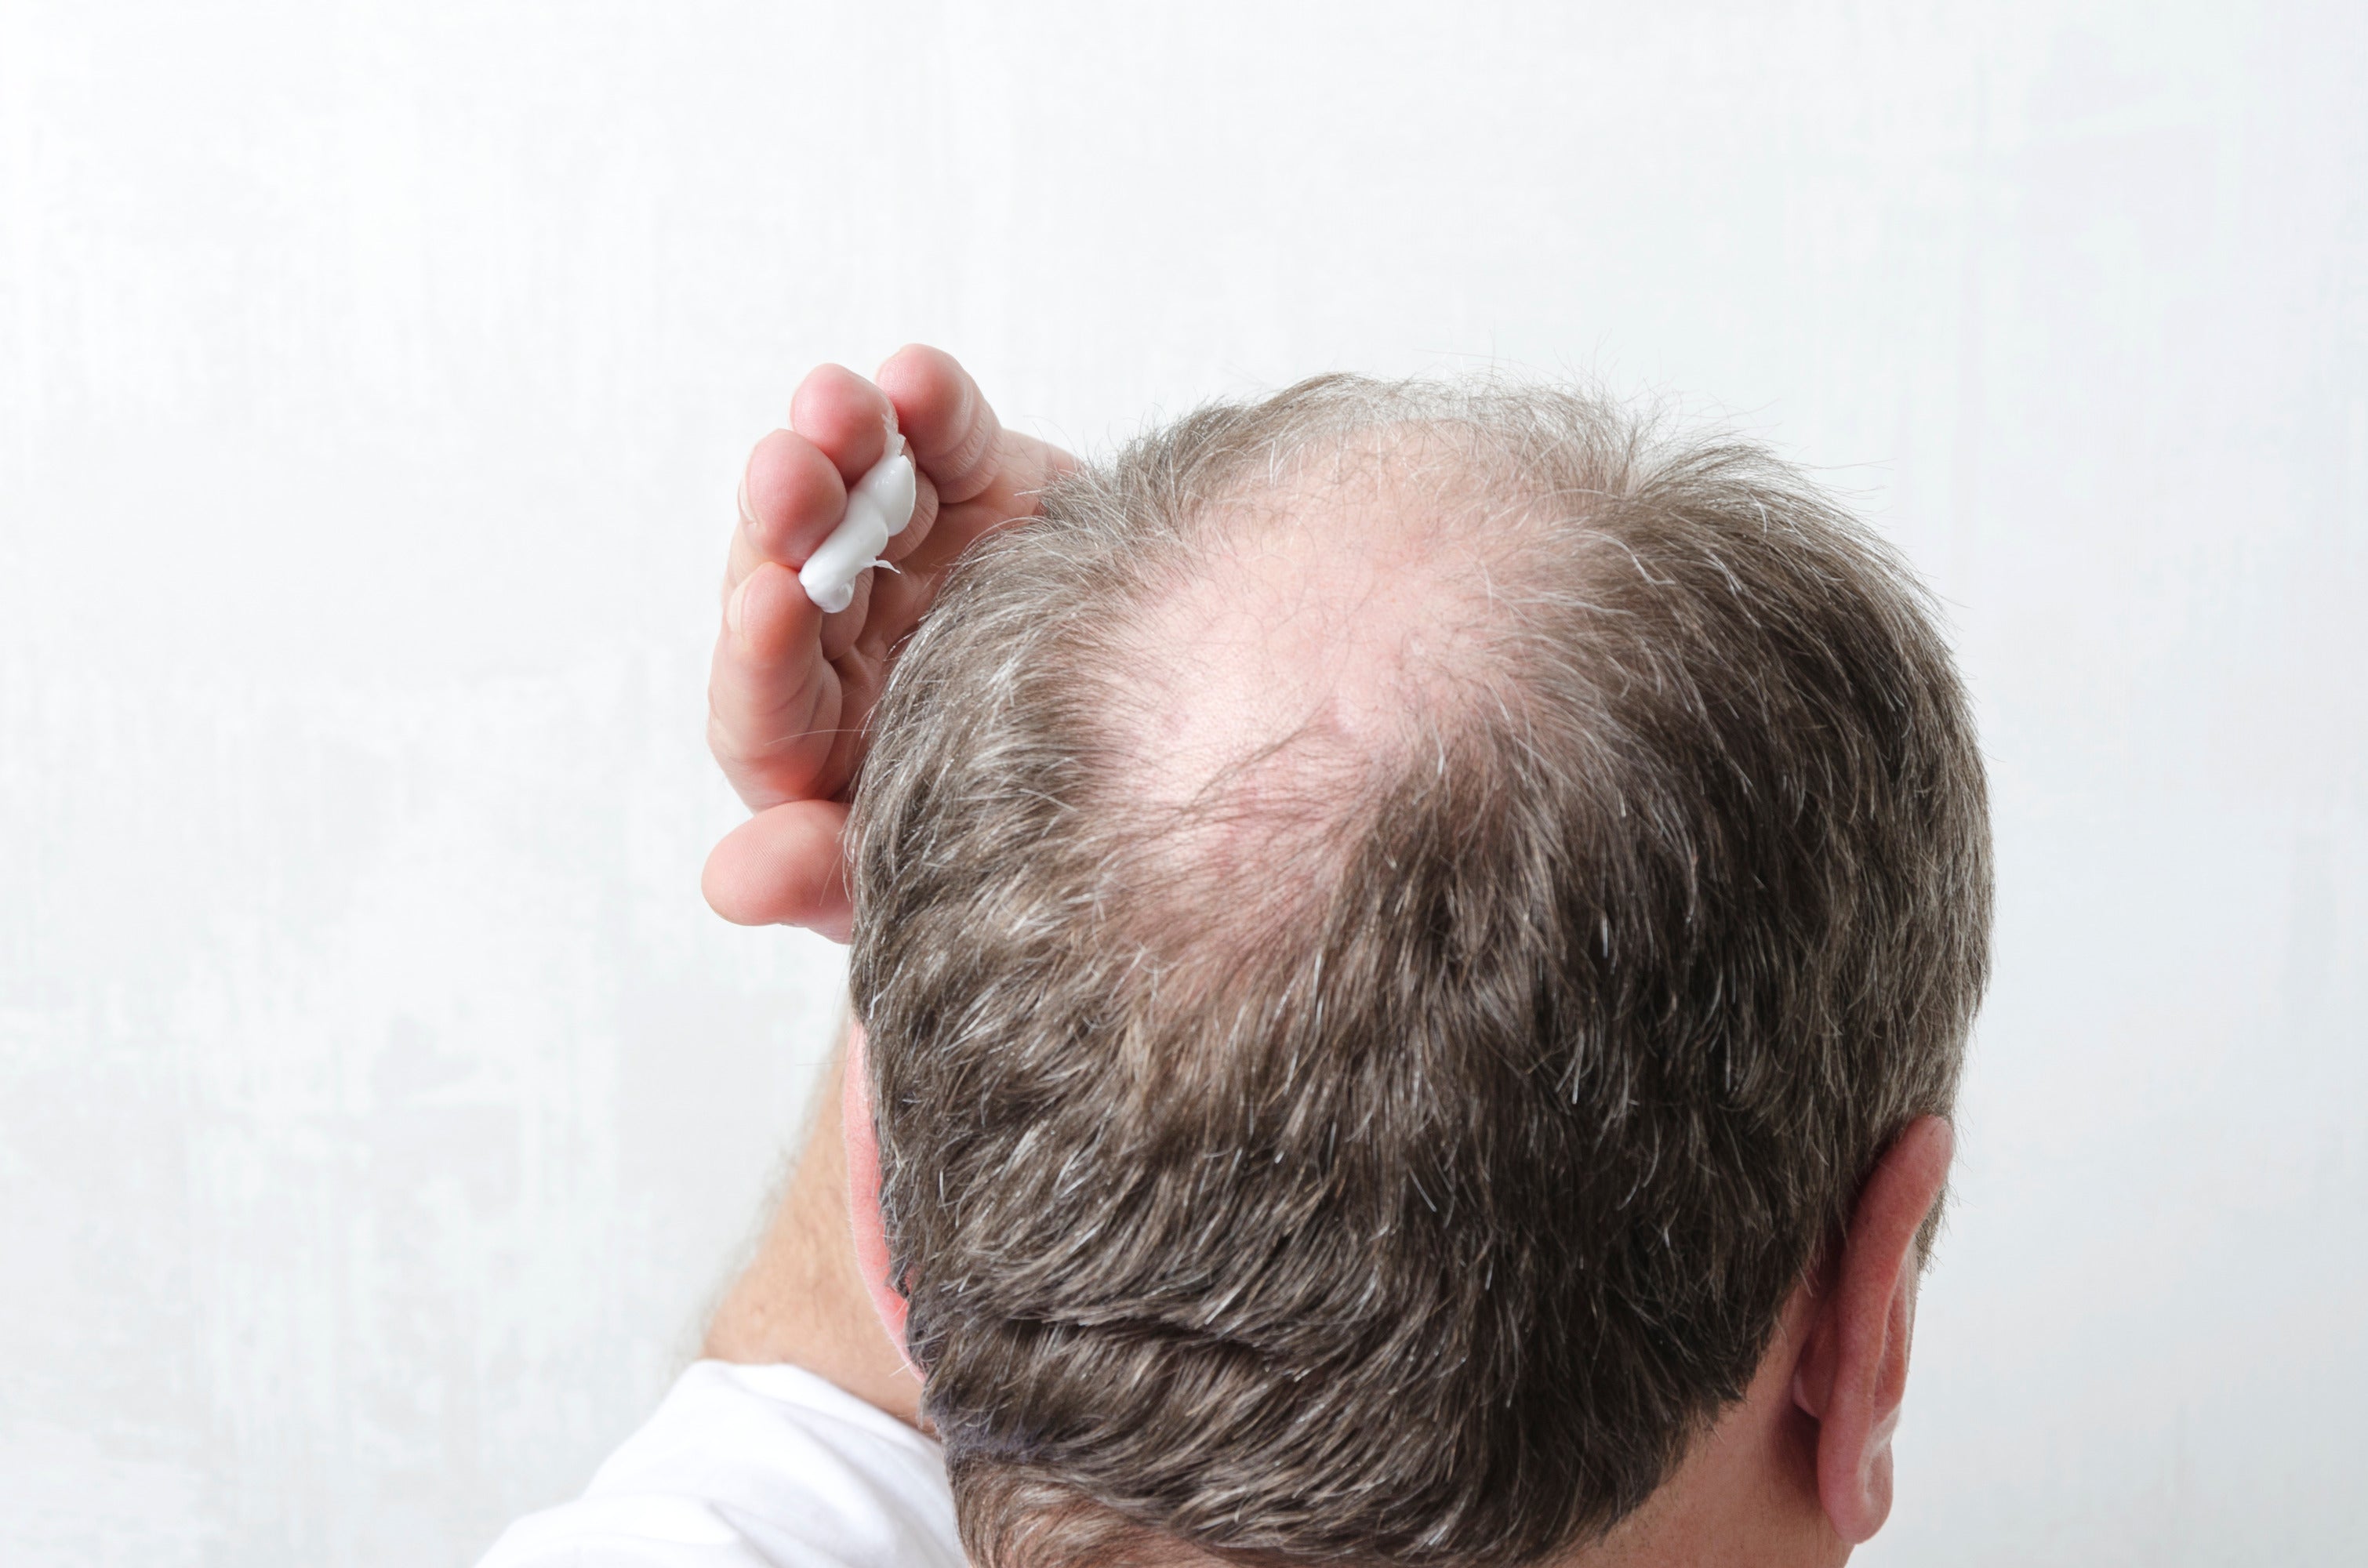 Relief from Sunburned Scalp Pain Over-the-Counter